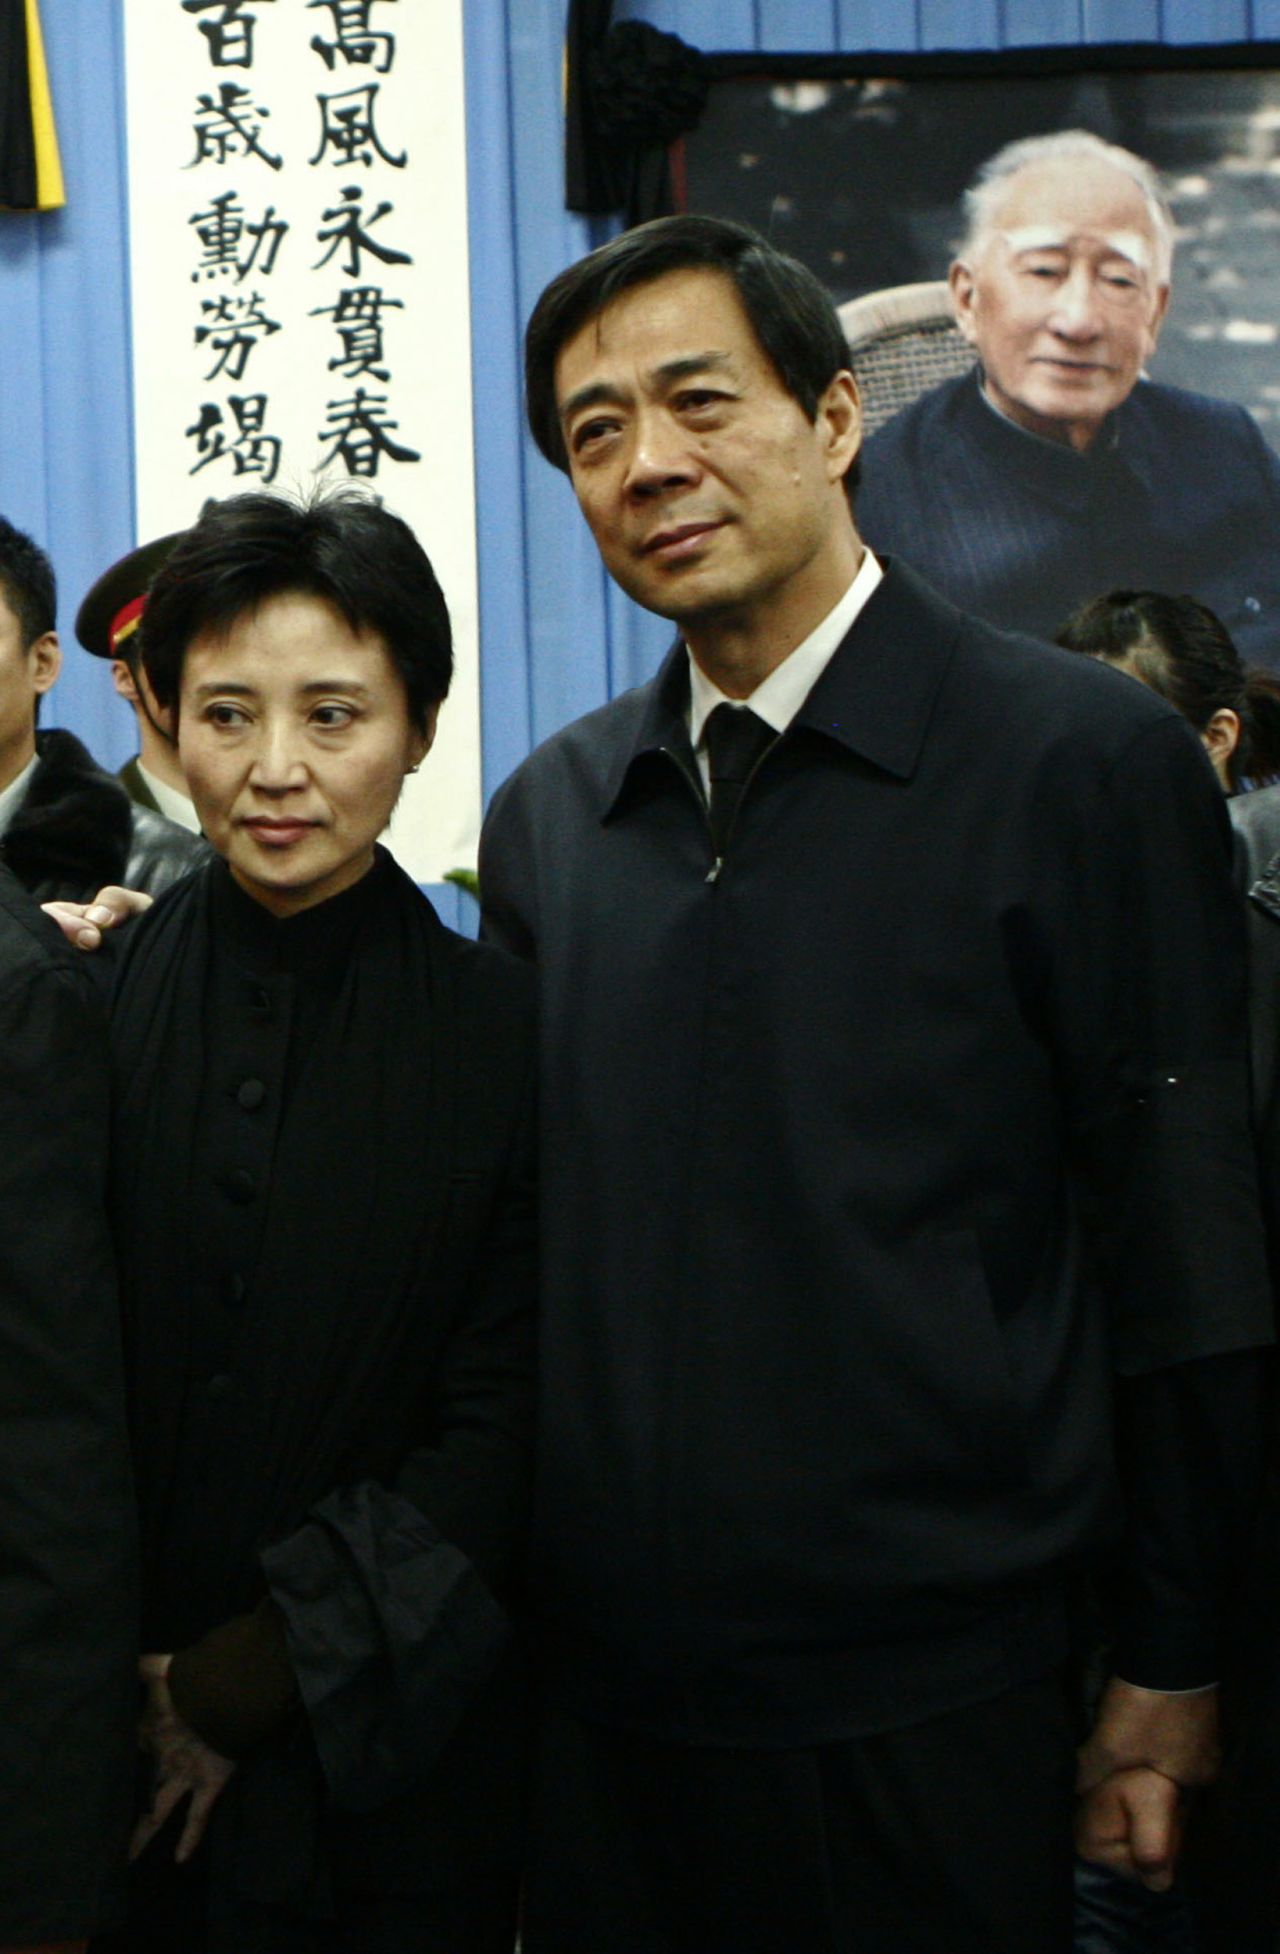 The spectacular fall of leading Communist Party chief Bo Xilai and the imprisonment of his wife, Gu Kailai, for murder, was the biggest political scandal to hit China in years. The new leadership has pledged to crack on official corruption.